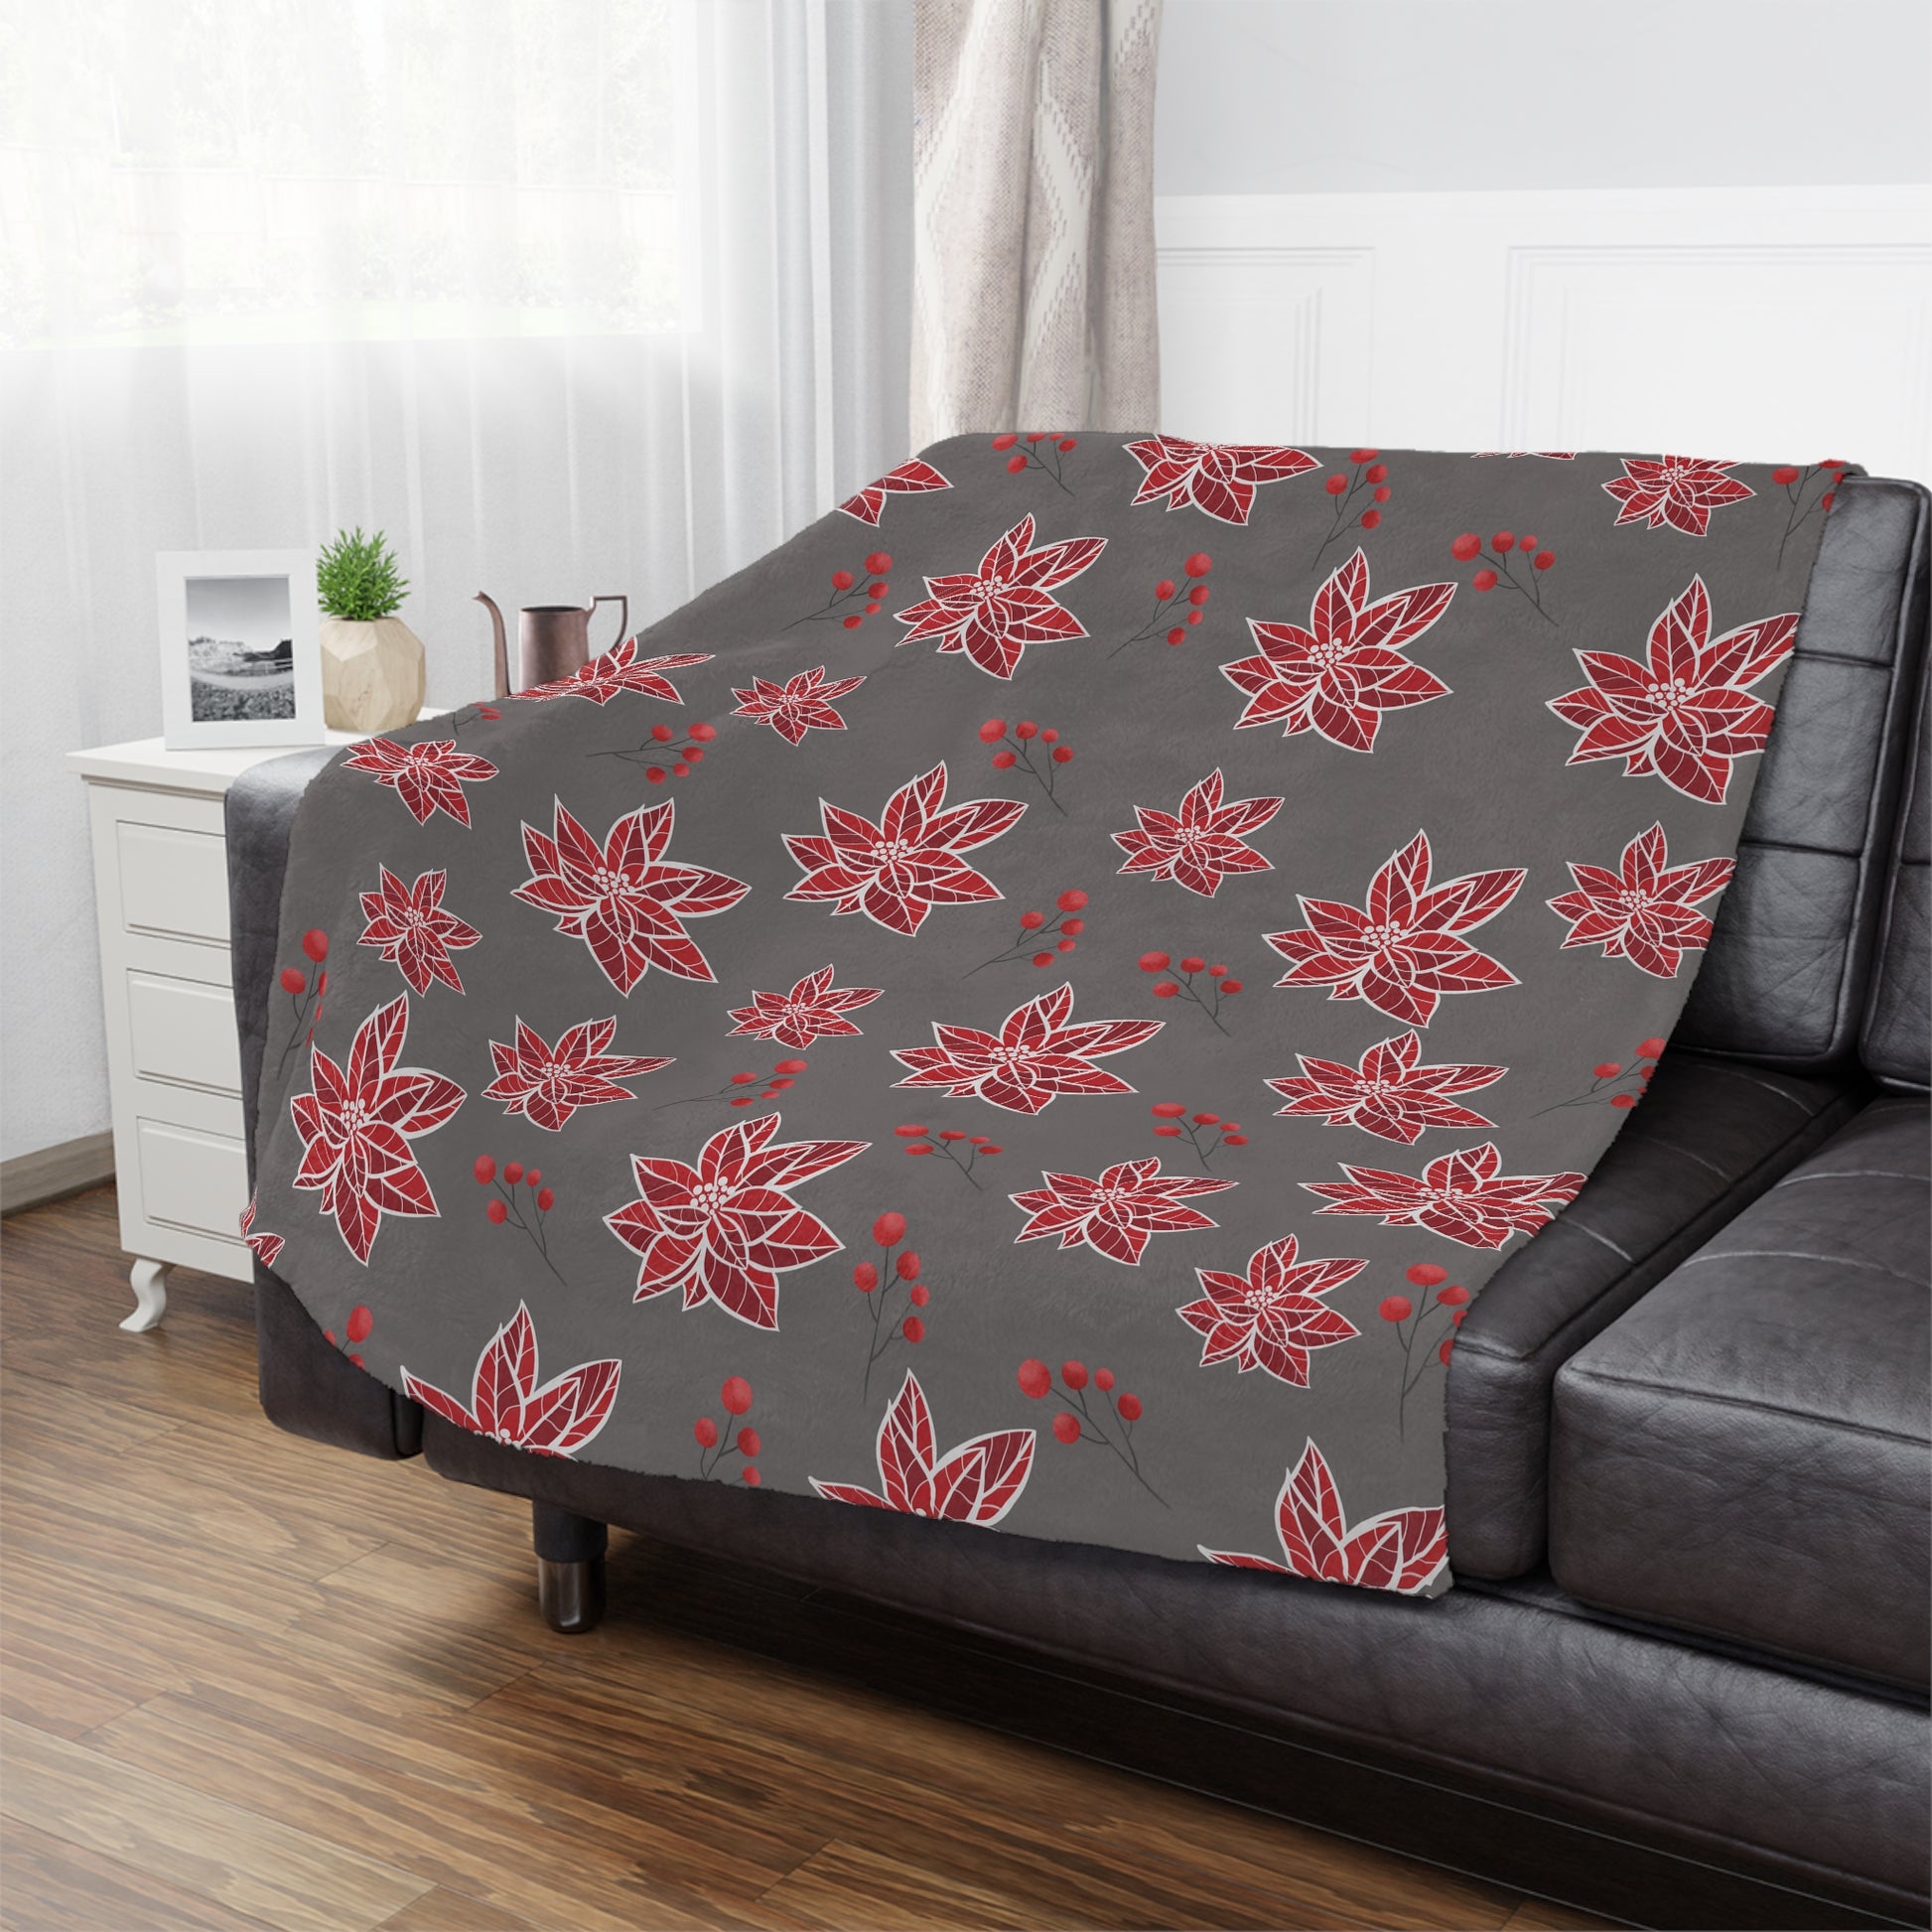 grey christmas blanket with red poinsettia pattern